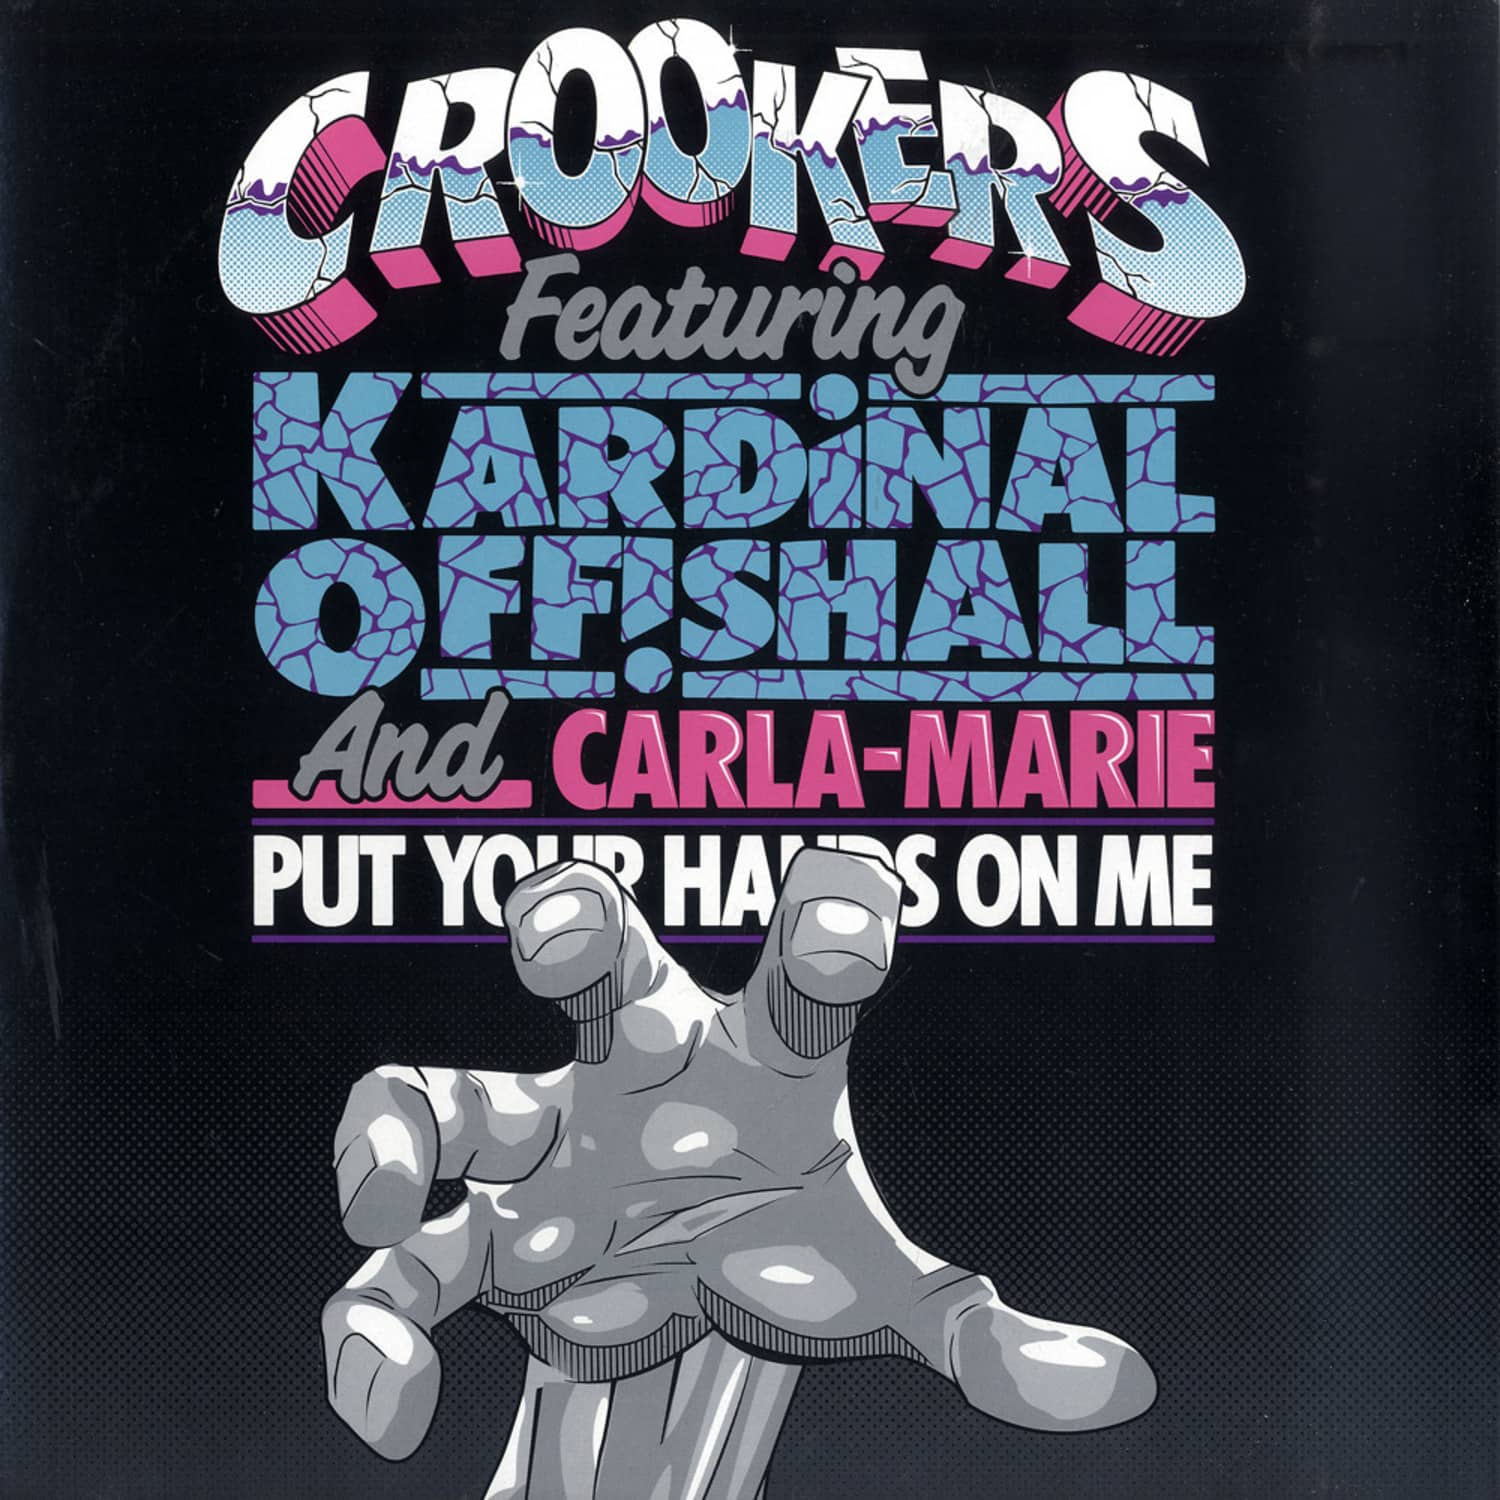 Cookers feat Kardinal Offshore - PUT YOUR HANDS ON ME